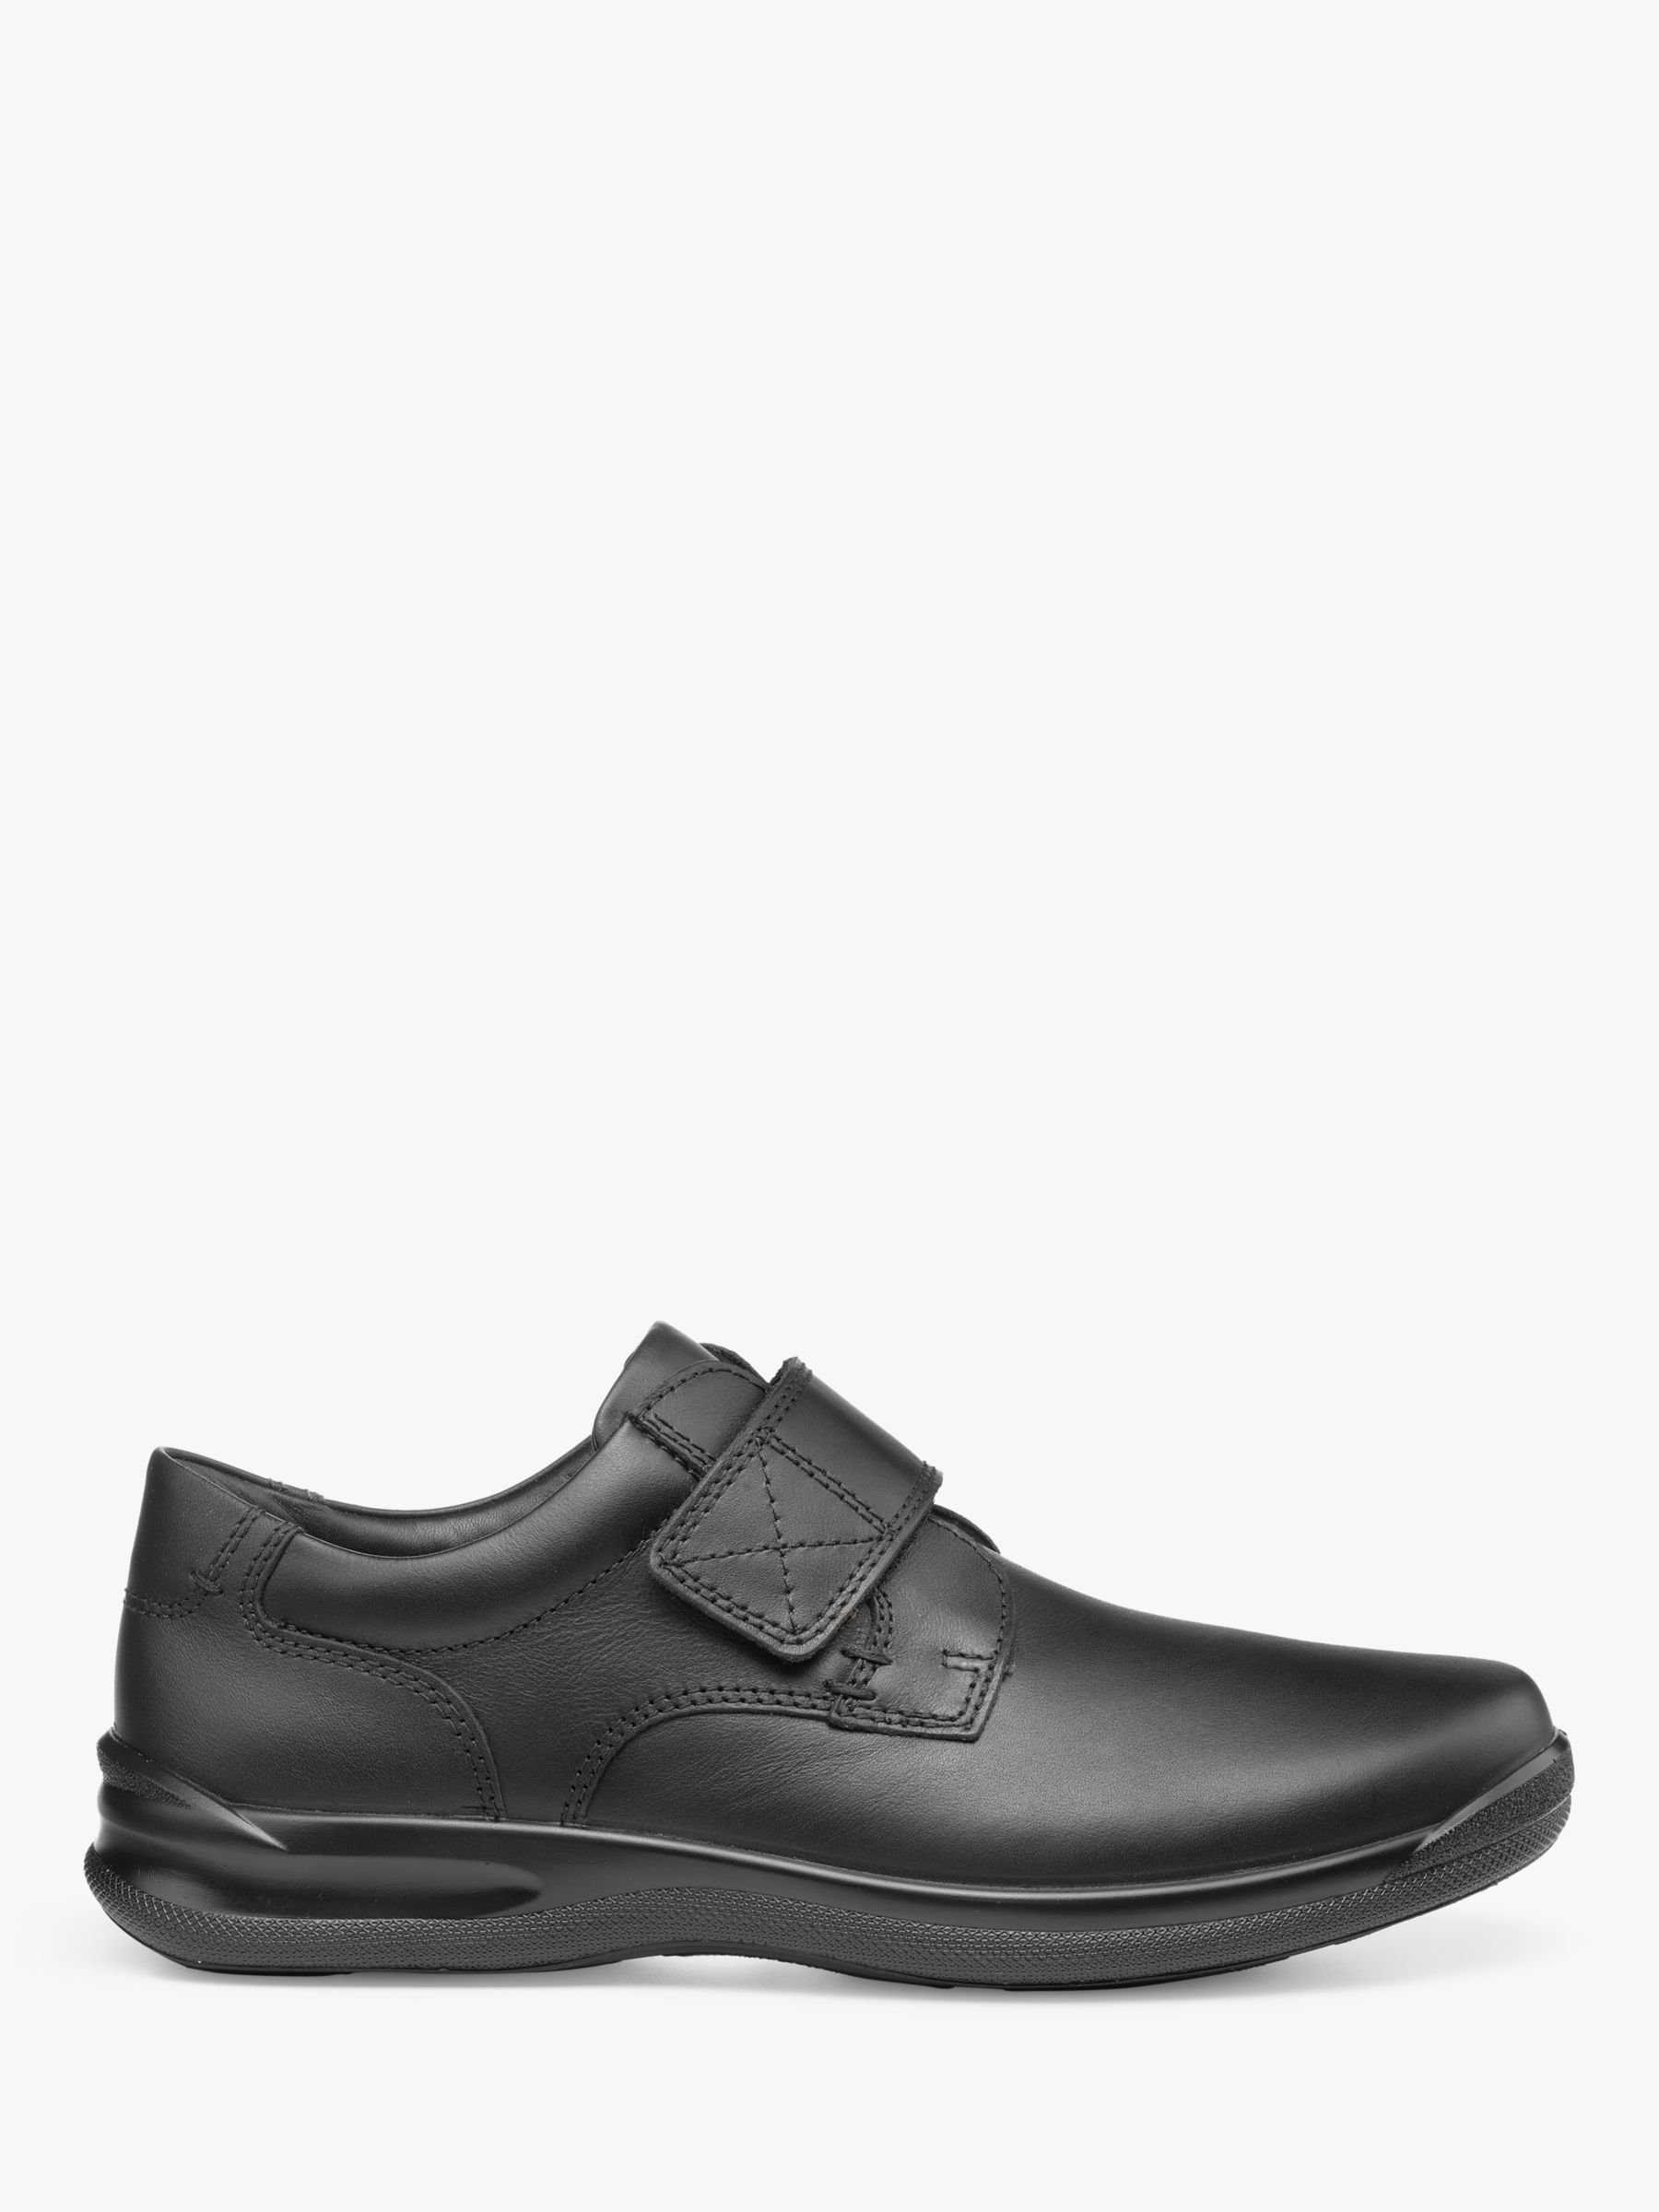 Hotter Sedgwick II Classic Leather Derby Shoes, Black, 7.5S